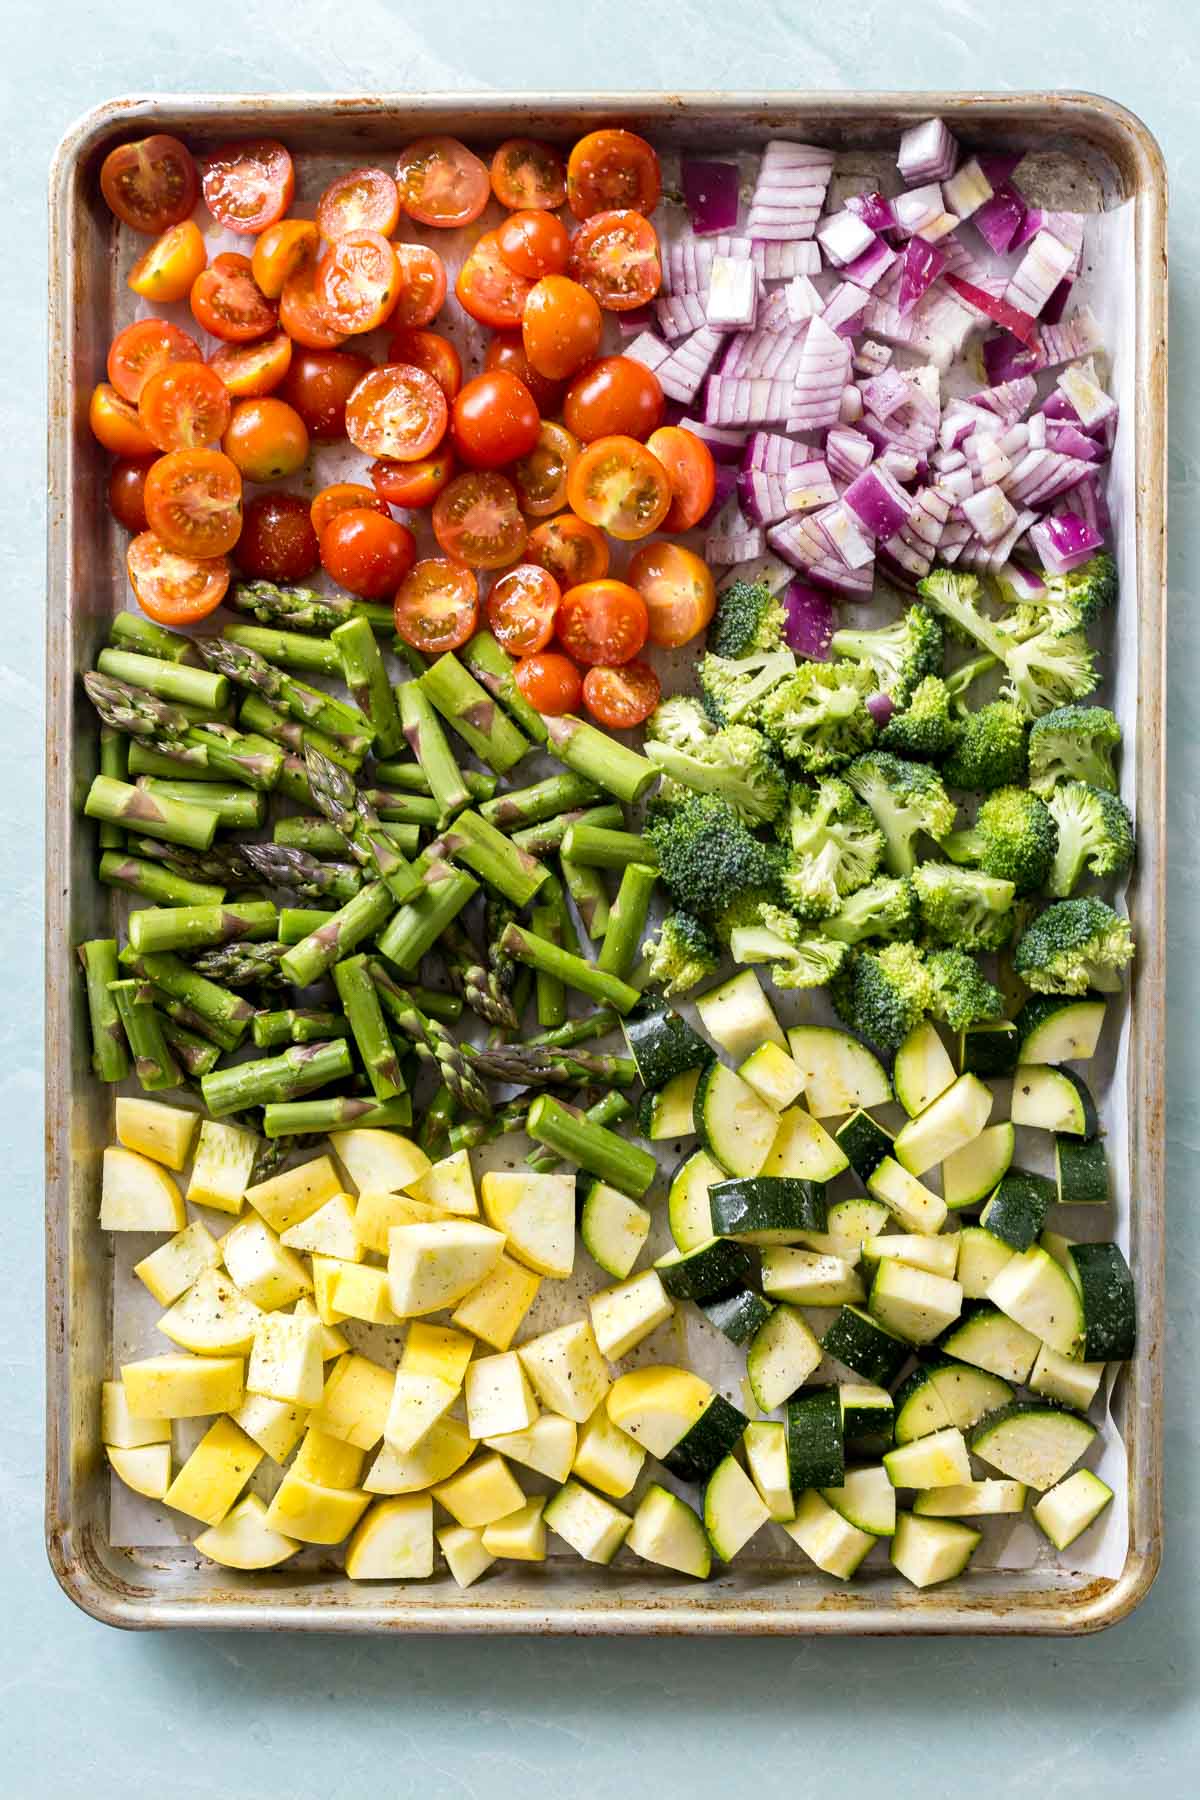 Summer vegetables on a cookie sheet before being cooked for roasted a vegetable pasta salad recipe